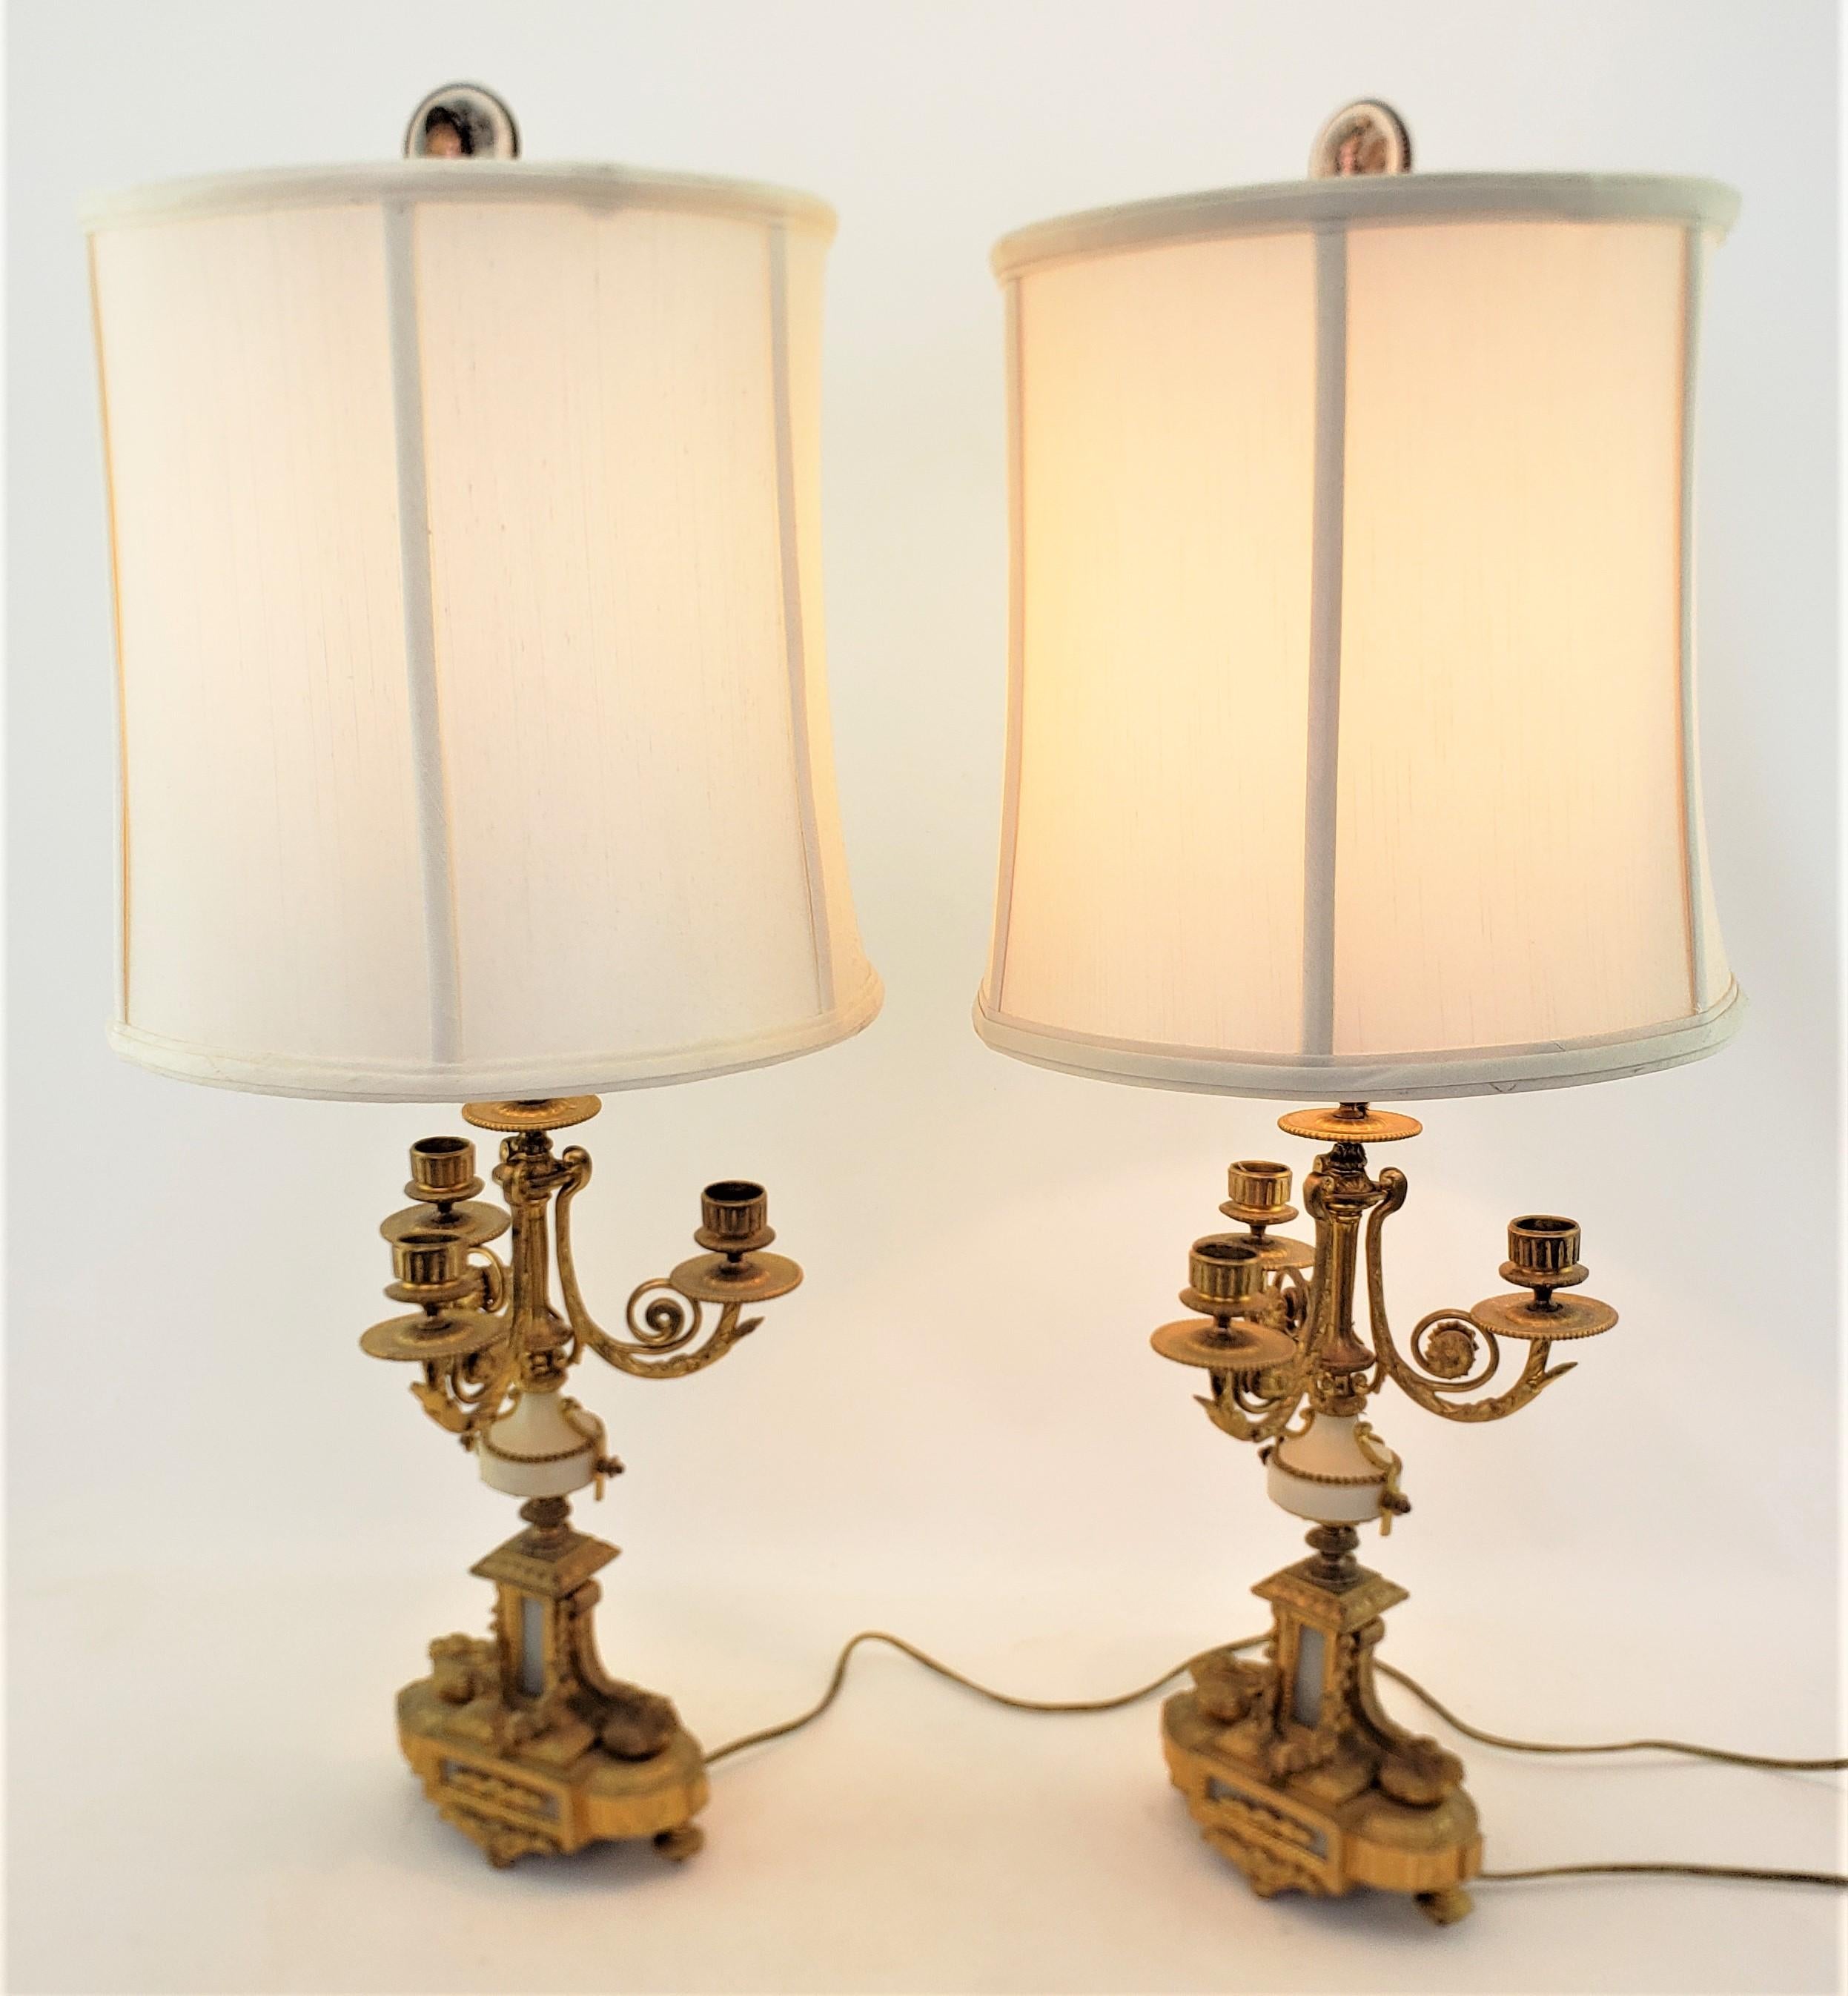 Cast Pair of Ornate Antique French Gilt Bronze Converted Candelabra Table Lamps For Sale